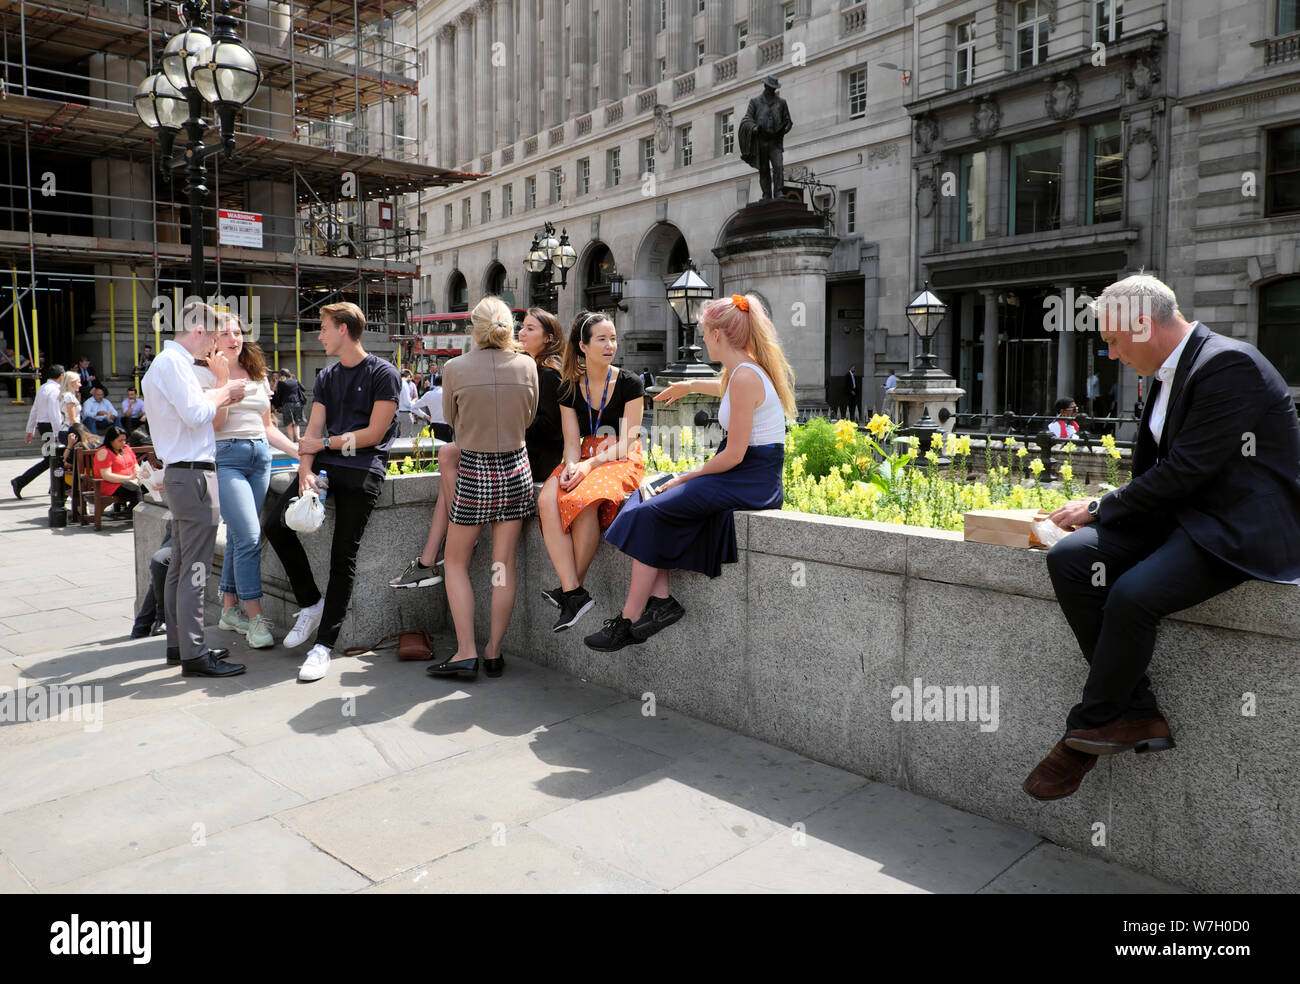 People in summer sitting at lunchtime in the square outside the Royal Exchange & Bank of England near Cornhill statue City of London UK  KATHY DEWITT Stock Photo